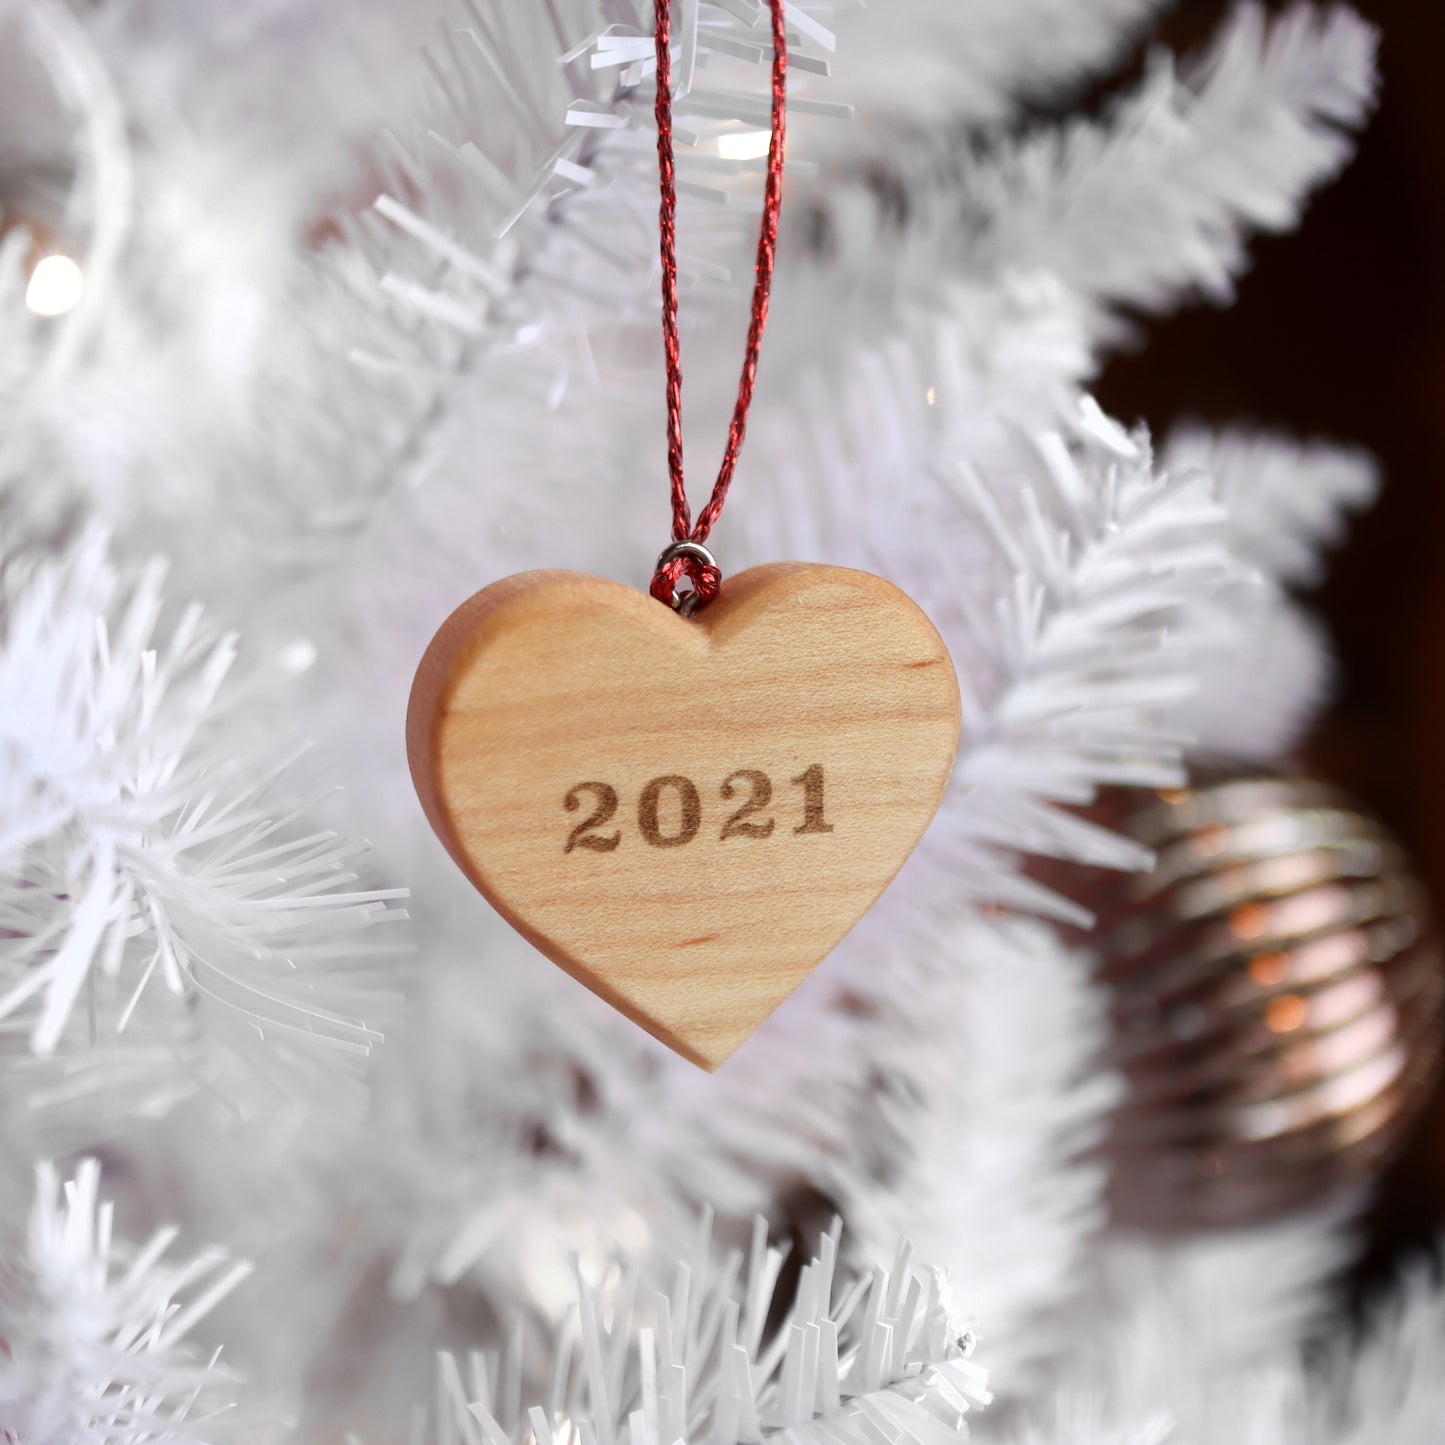 2021 Engraved Ornament